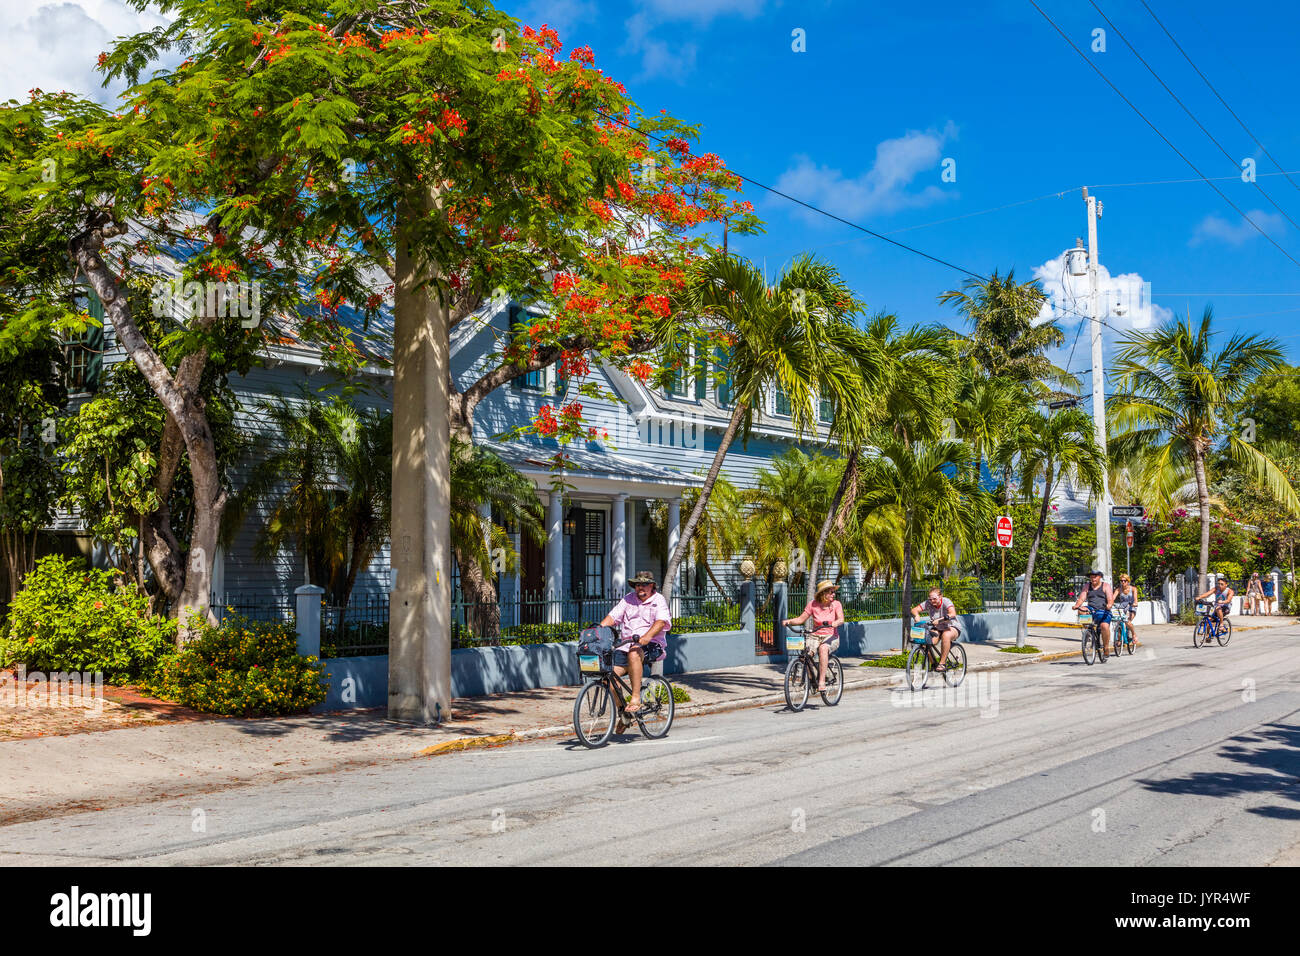 People riding bikes in Key West Florida Stock Photo